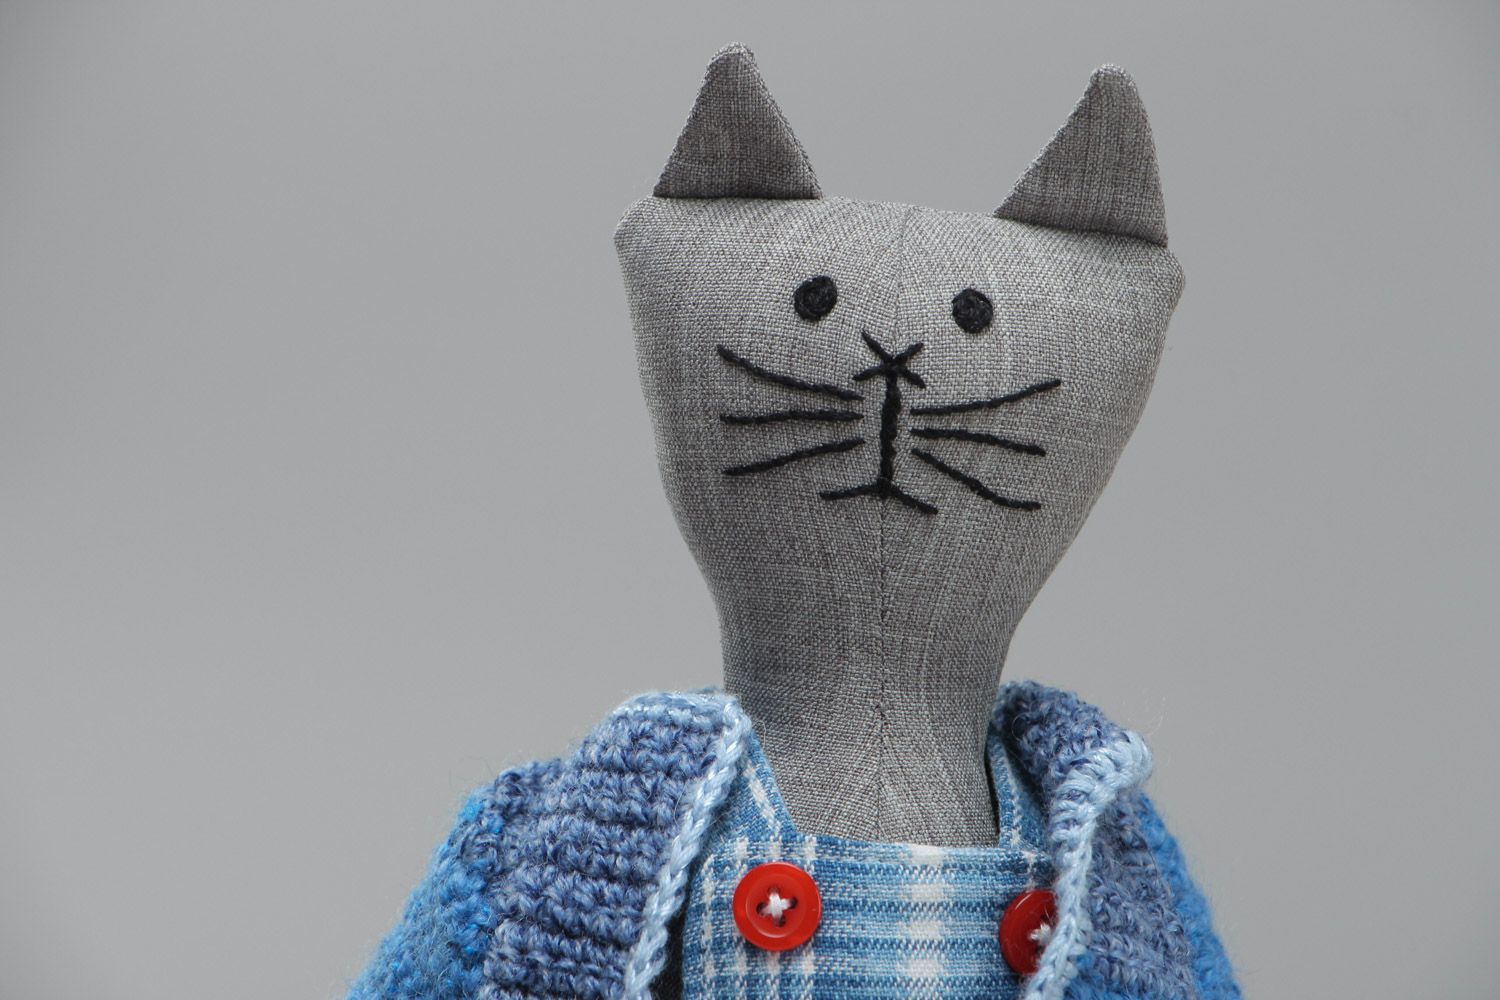 Handmade soft toy sewn of cotton cute gray cat in crocheted blue jacket photo 3